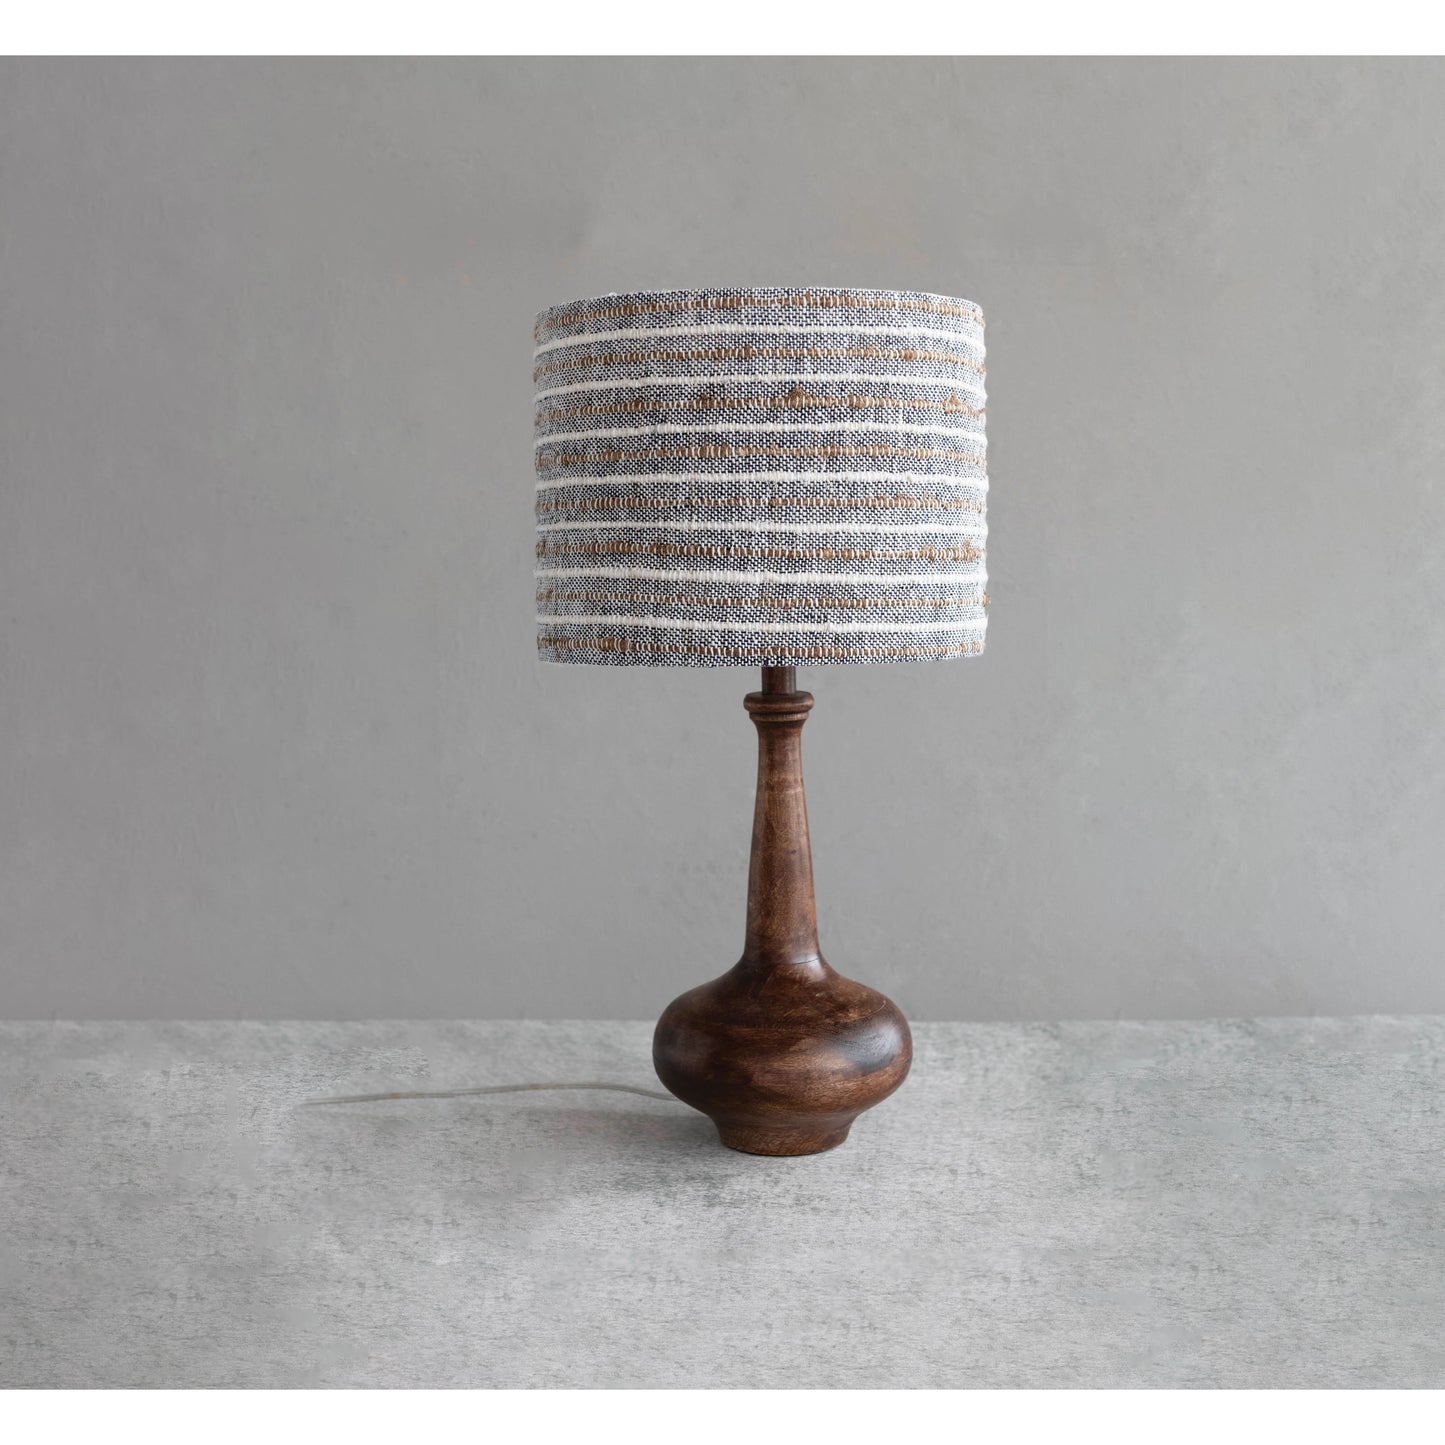 Mango Wood Table Lamp with Woven Cotton and Linen Striped Shade